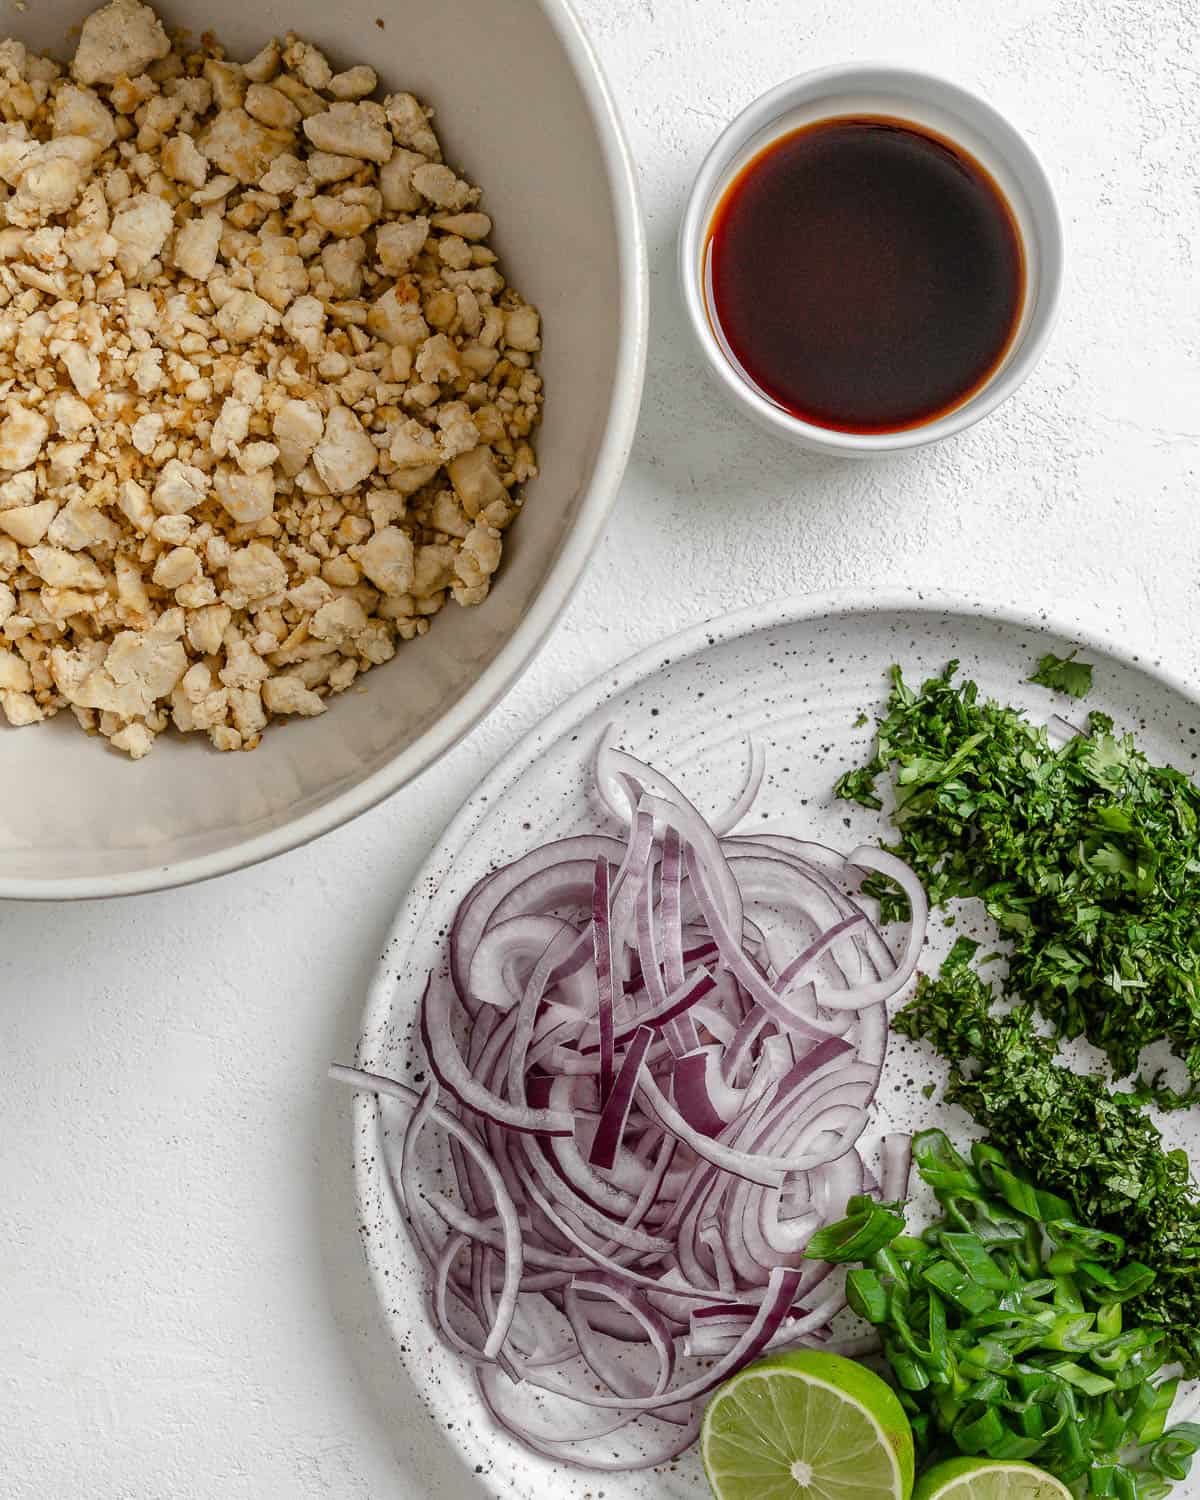 larb and veggies in two separate white bowls along side sauce against a white background